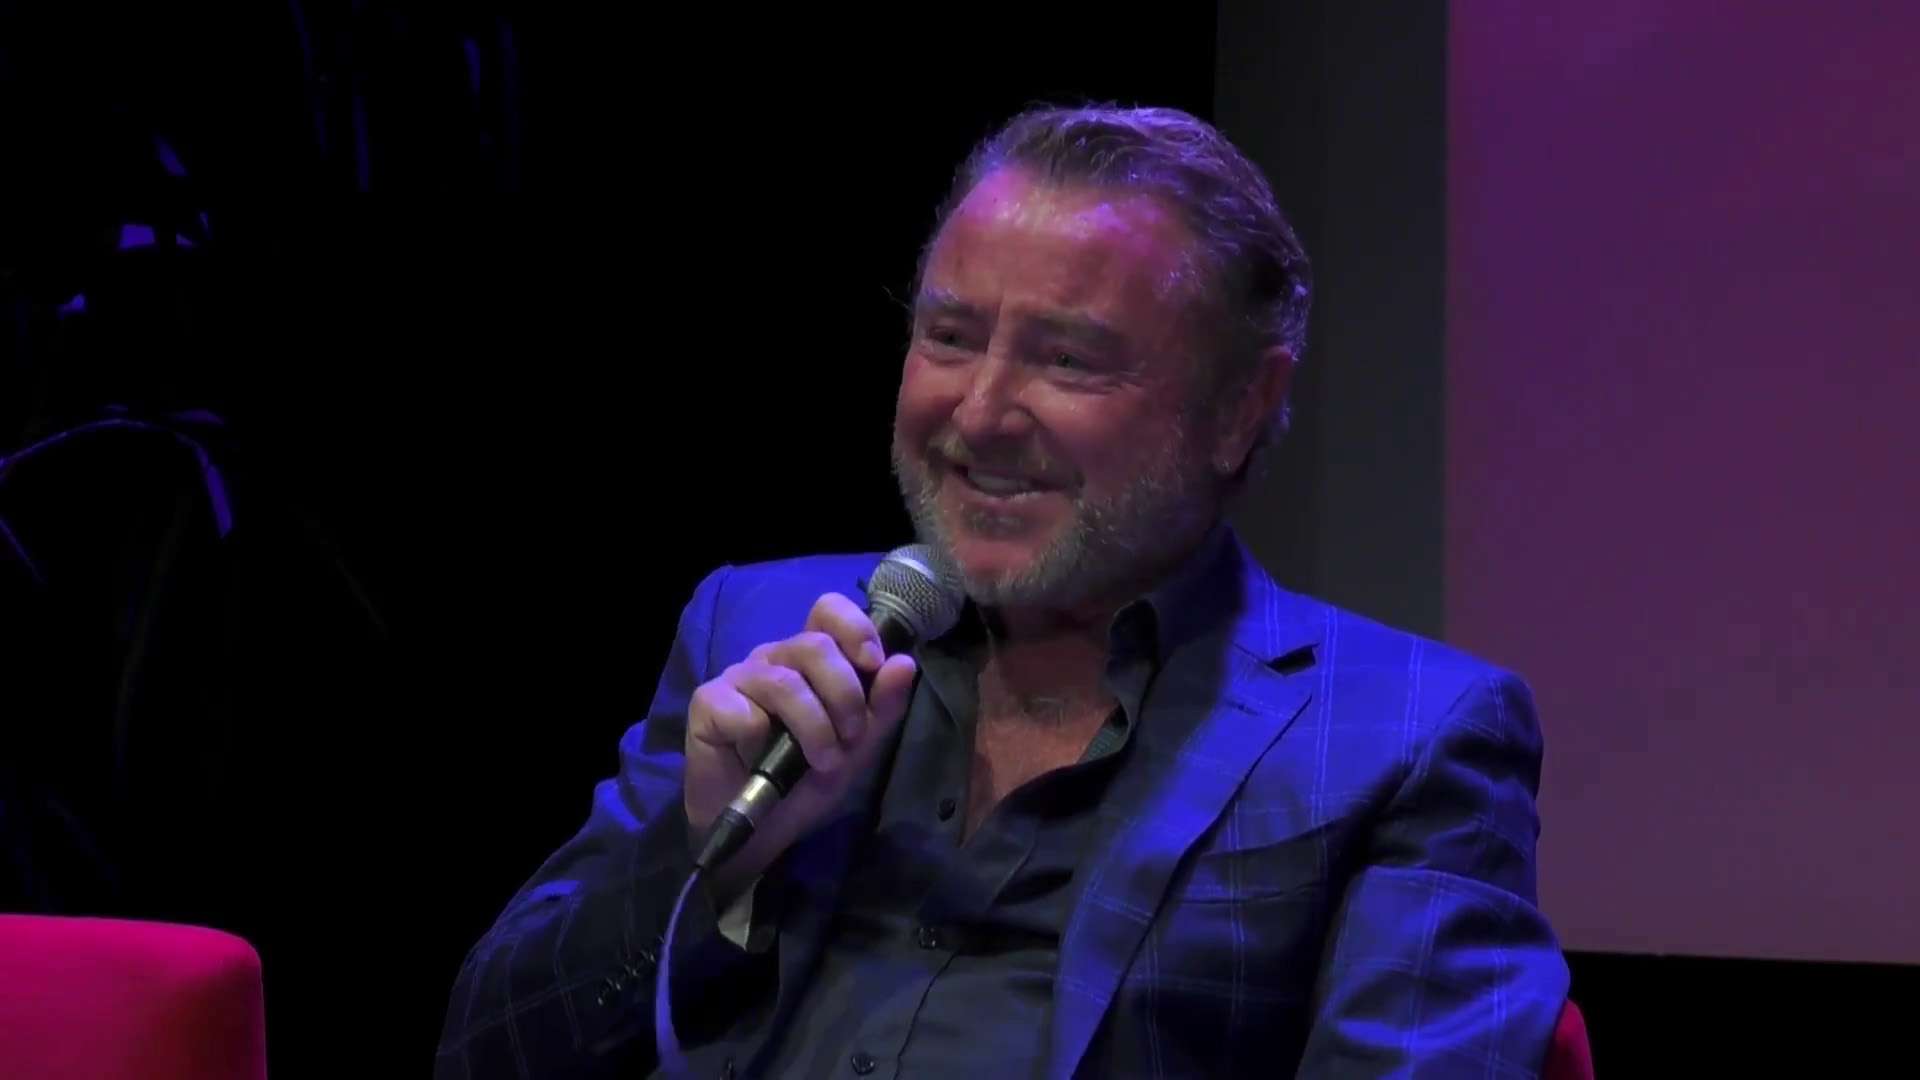 A conversation with Michael Flatley